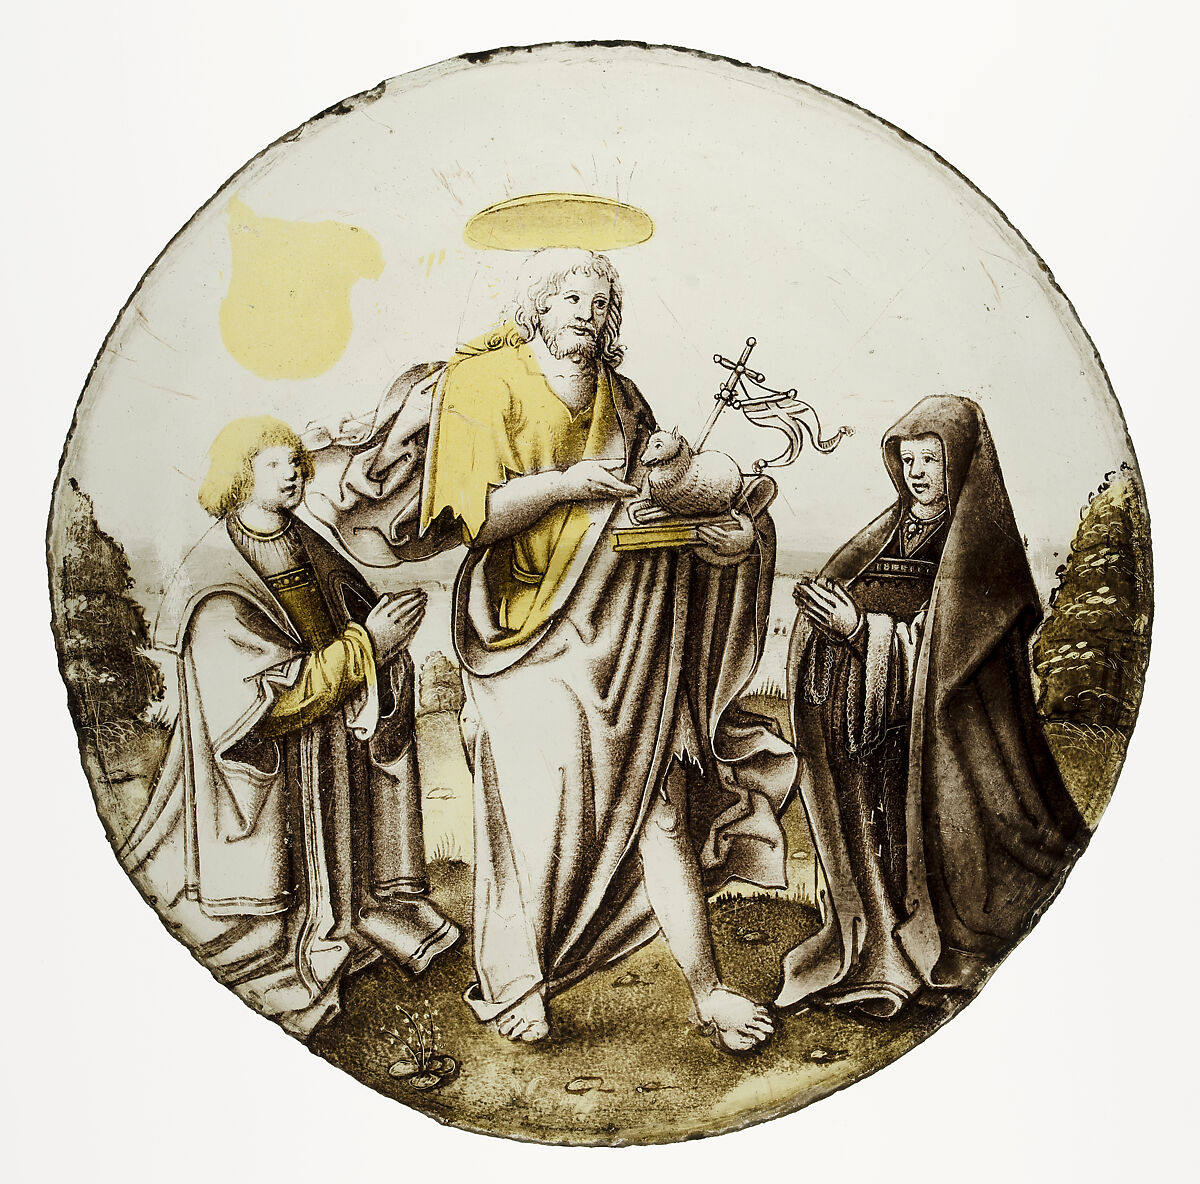 Roundel with Saint John the Baptist and Donors, Colorless glass, silver stain, vitreous paint, South Netherlandish 